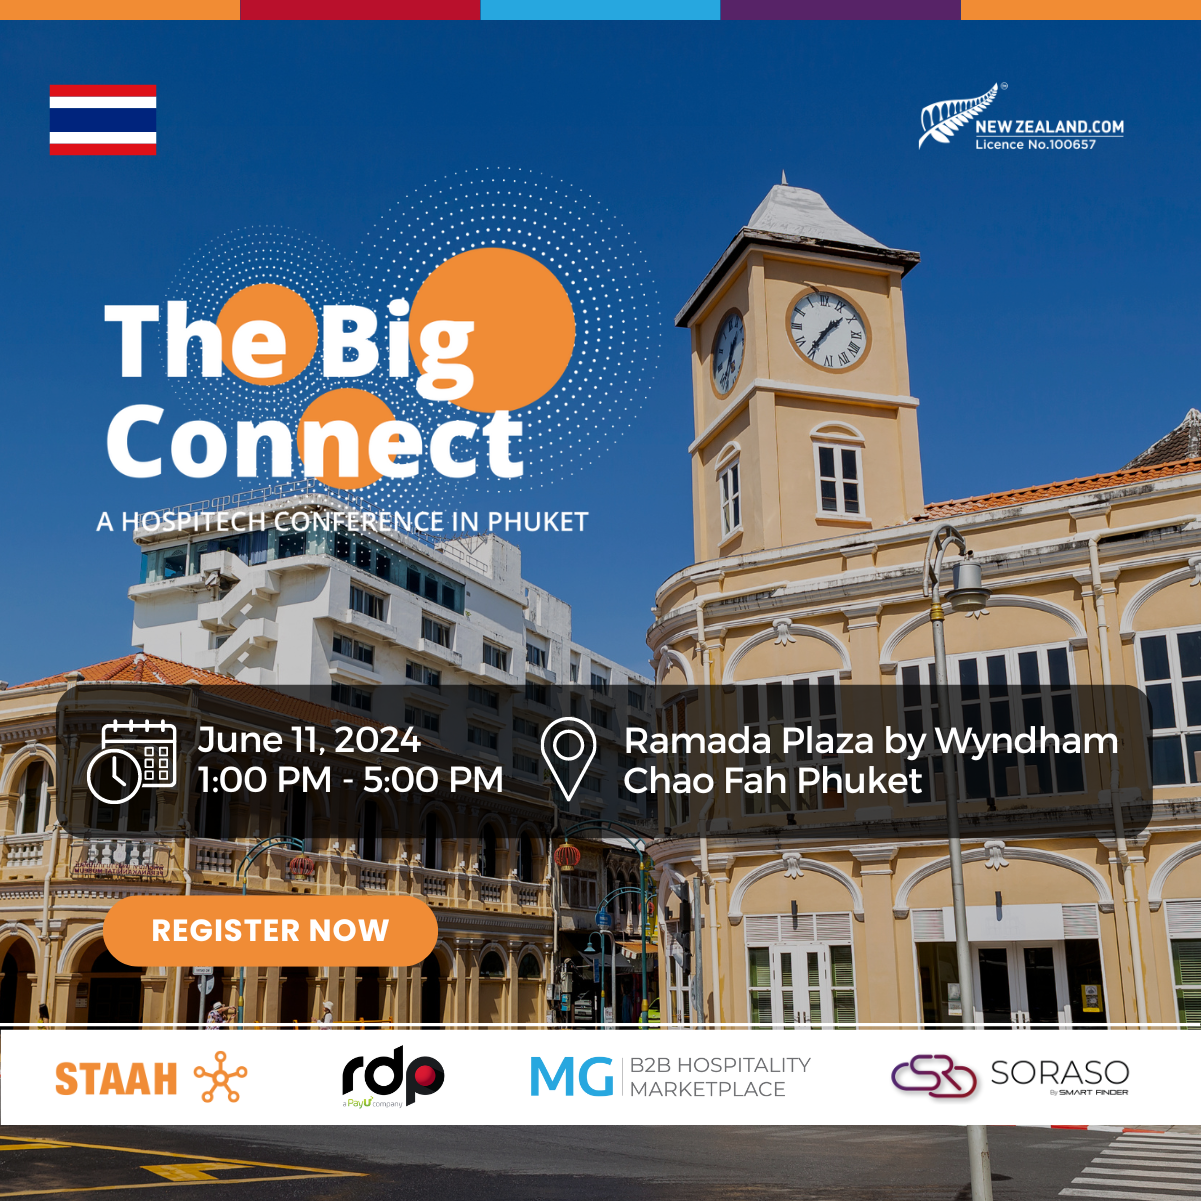 The Big Connect Hospitech Conference in Phuket